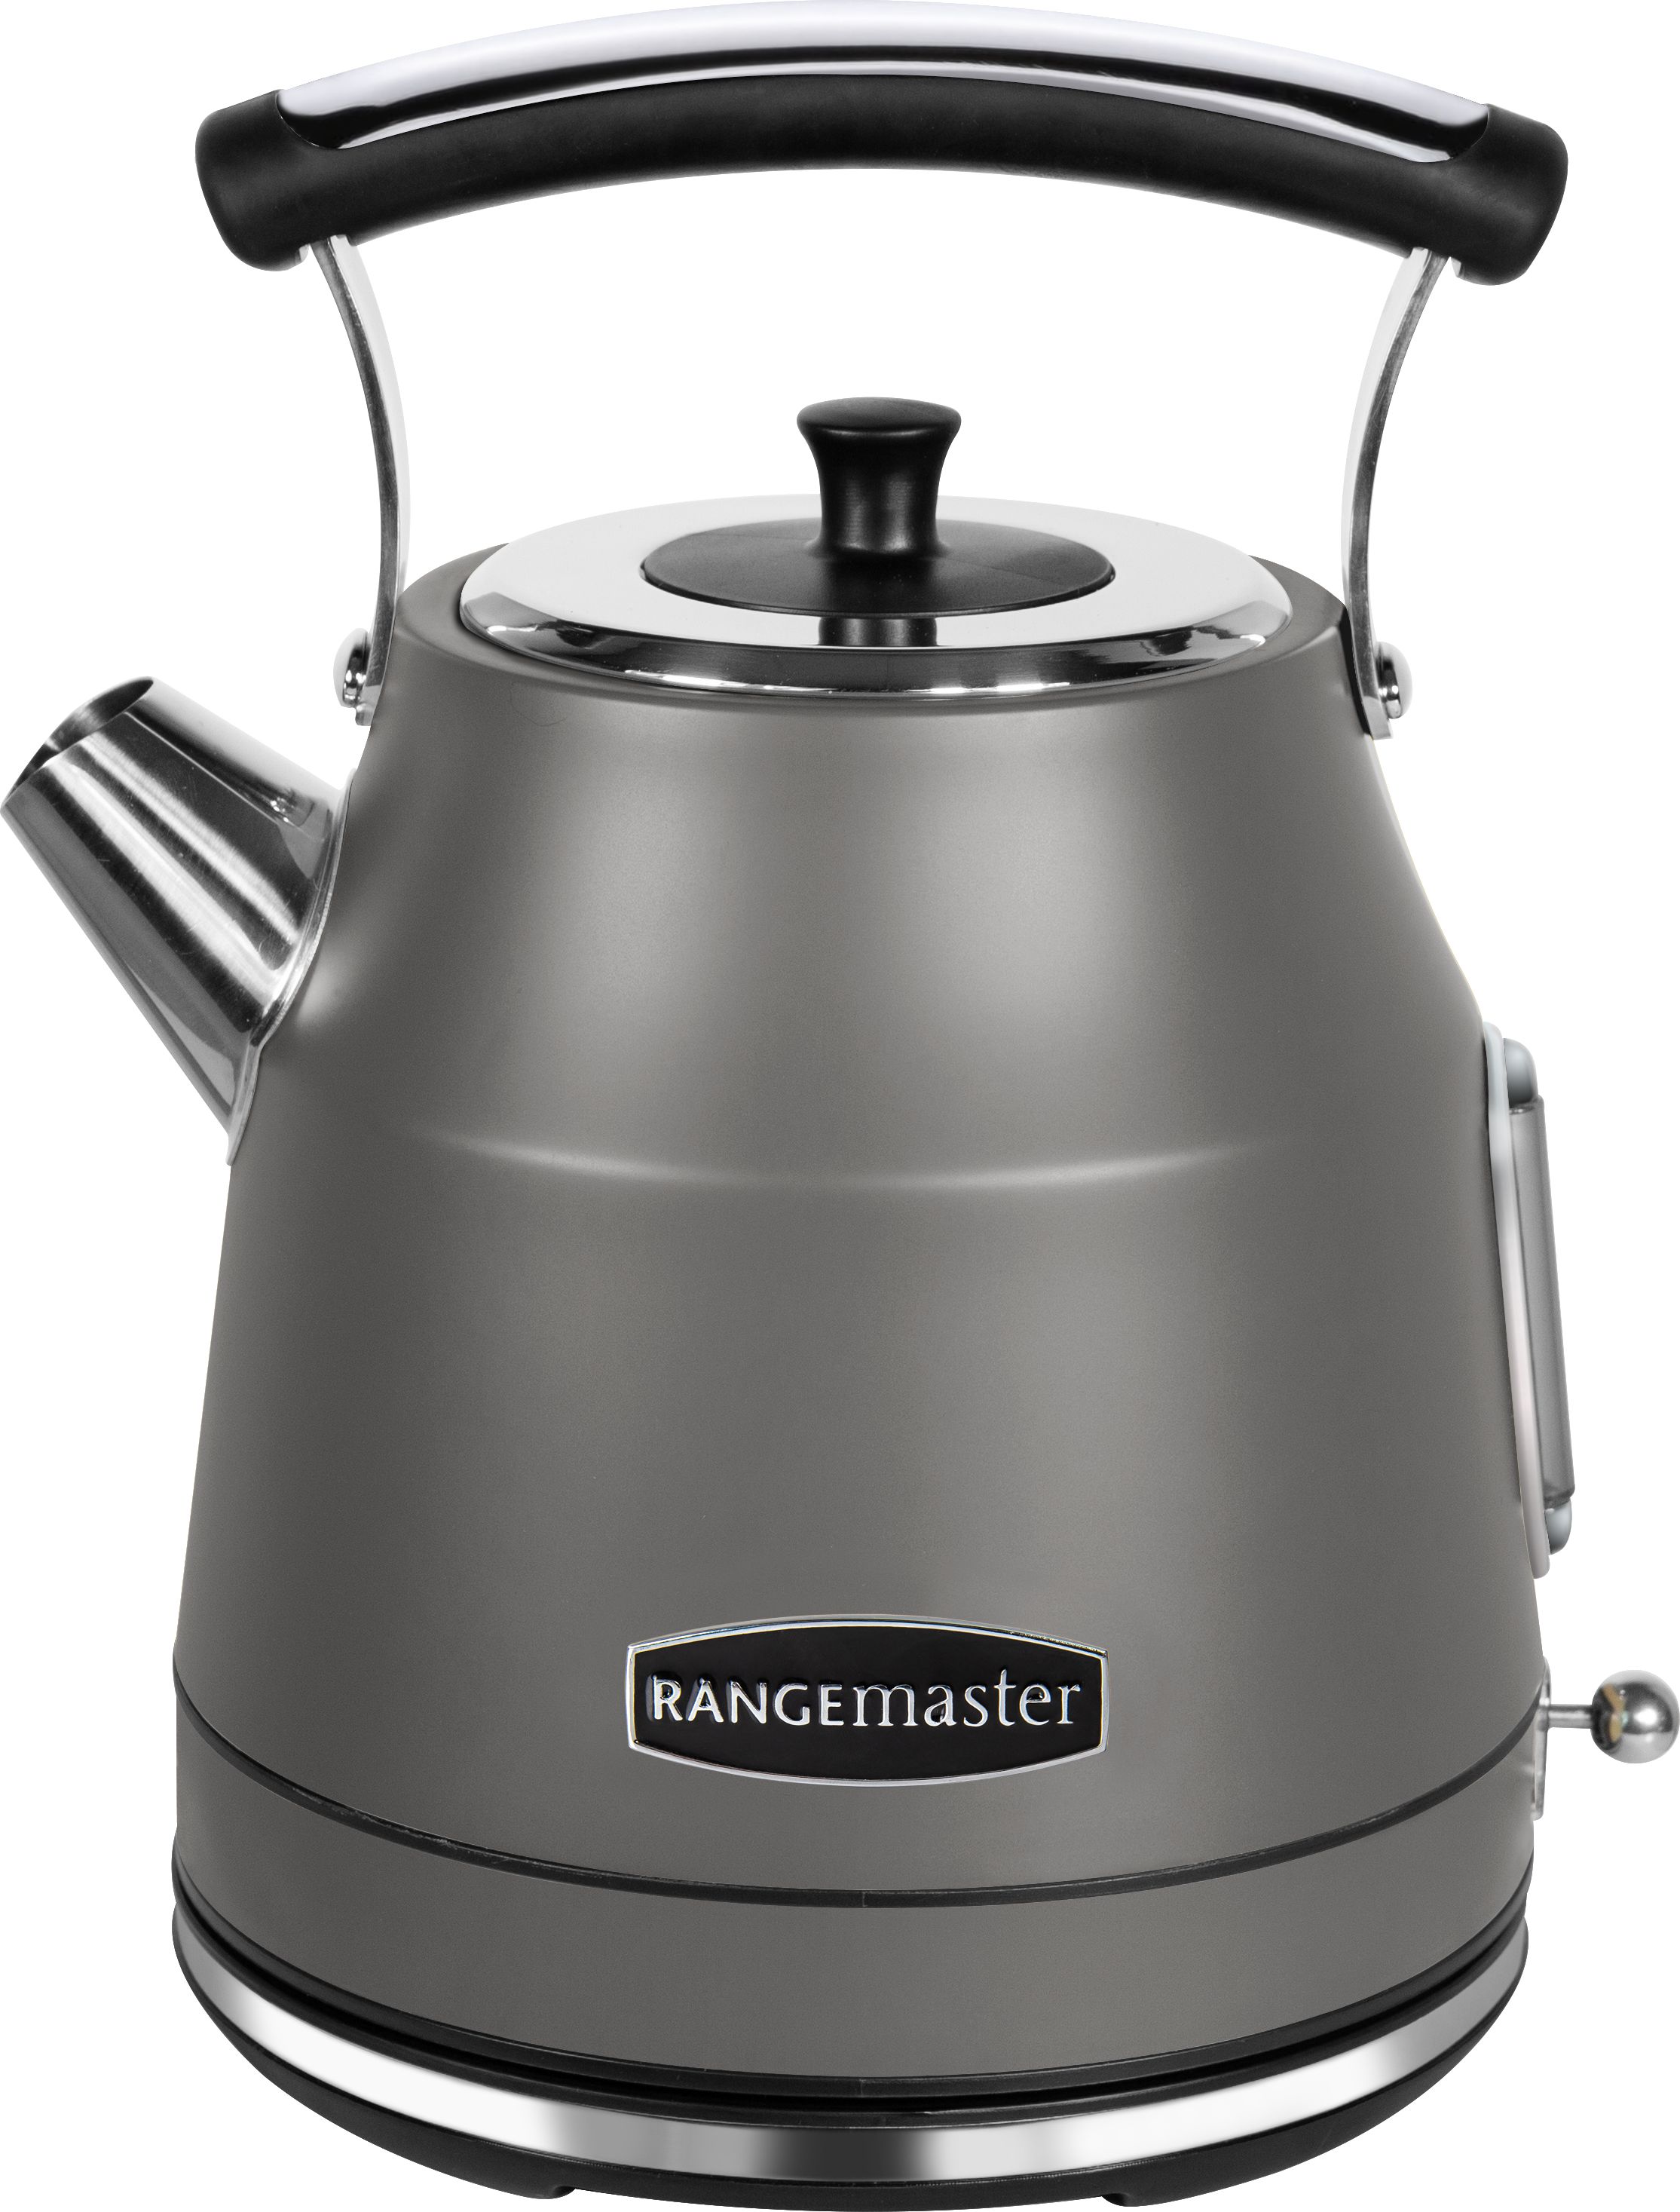 Rangemaster Classic Quiet Boil RMCLDK201GY Kettle - Silver, Silver